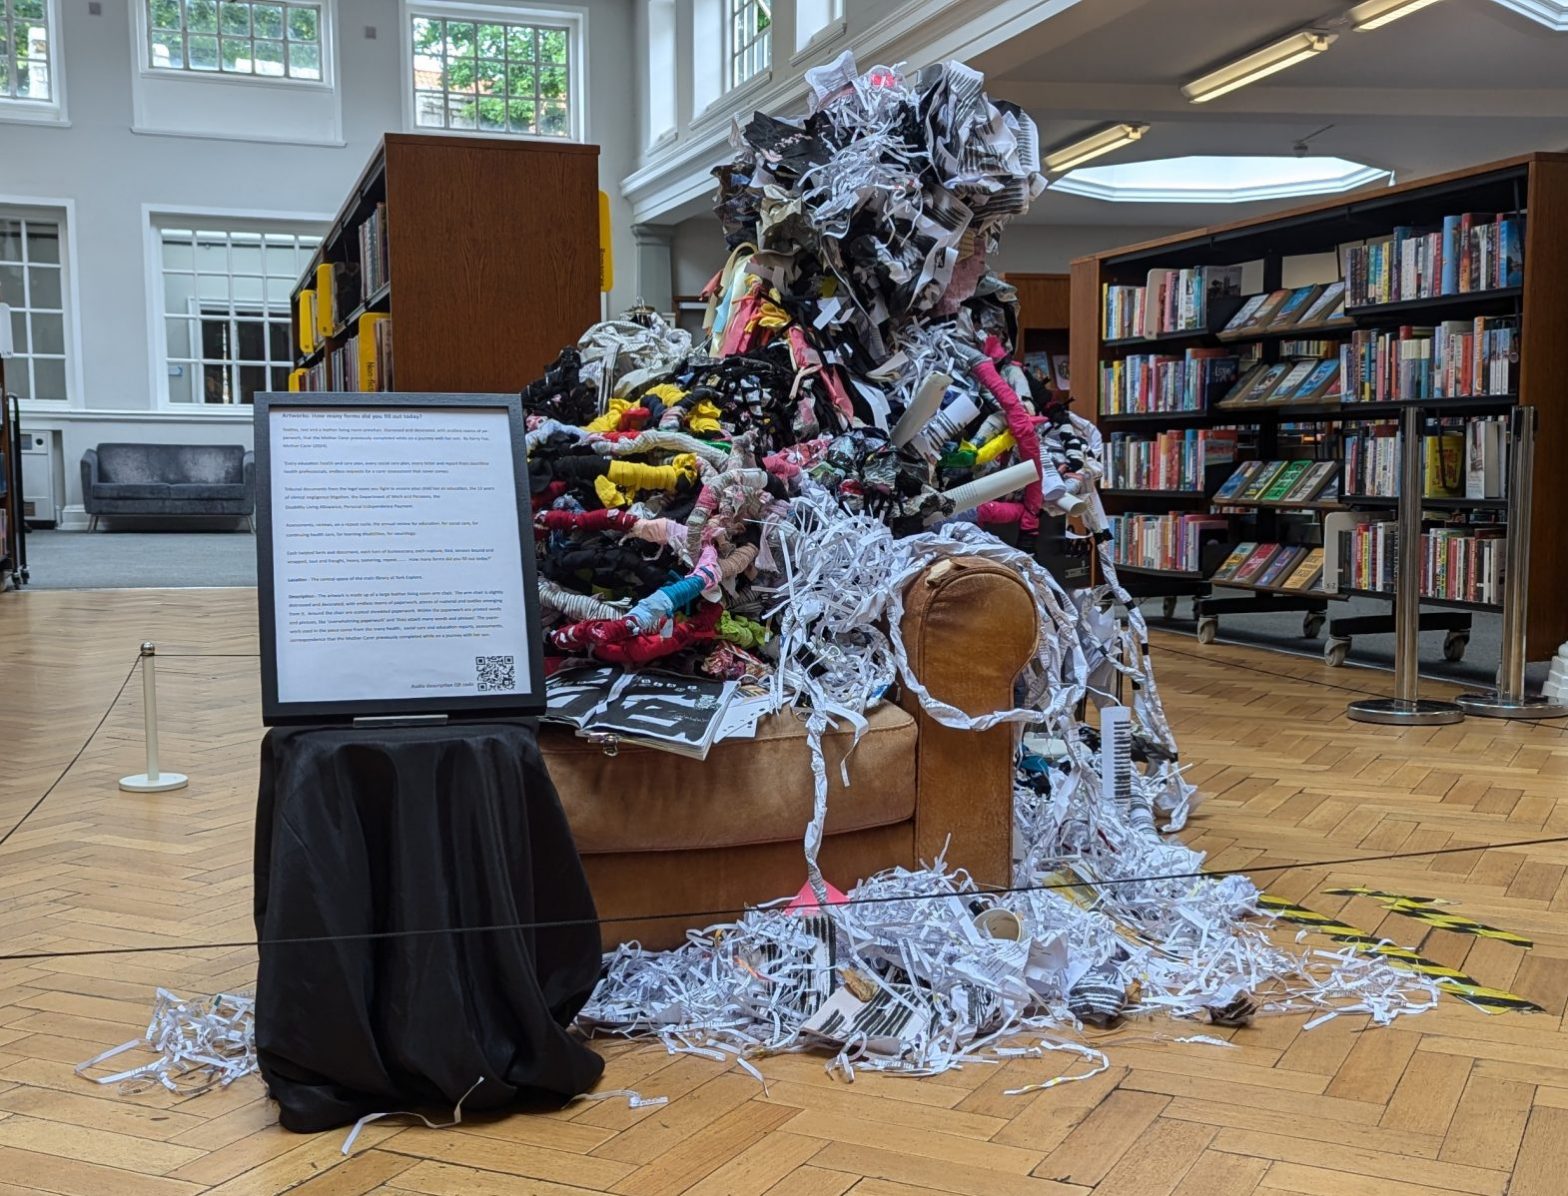 The artwork is made up of a large leather living room arm chair. The arm chair is slightly distressed and decorated, with endless reams of paperwork, pieces of material and textiles emerging from it. Around the chair are scatted shredded paperwork. Within the paperwork are printed words and phrases, like ‘overwhelming paperwork’ and ‘they attach many words and phrases’. The paper-work used in the piece come from the many health, social care and education reports, assessments, correspondence that the Mother Carer previously completed while on a journey with her son.